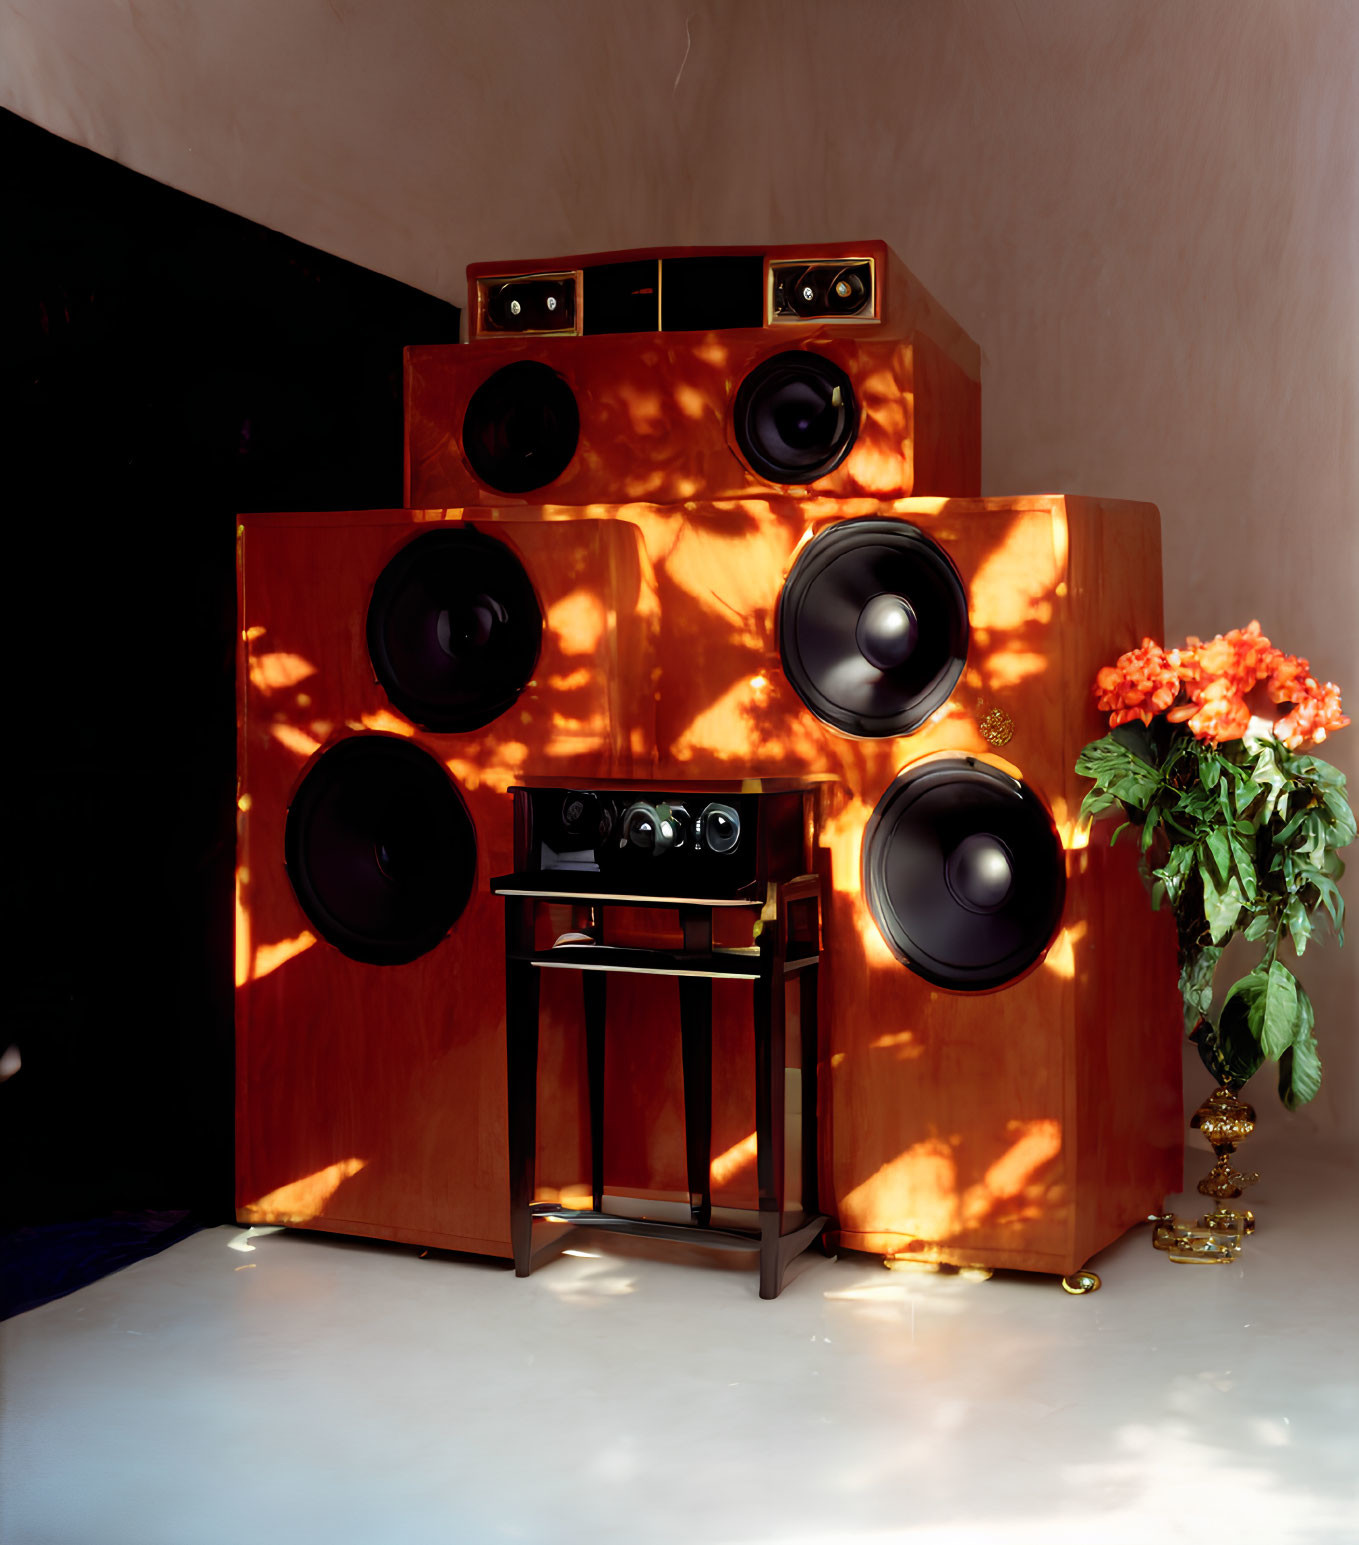 Vintage speaker system with wooden finish and amplifier in warmly lit room